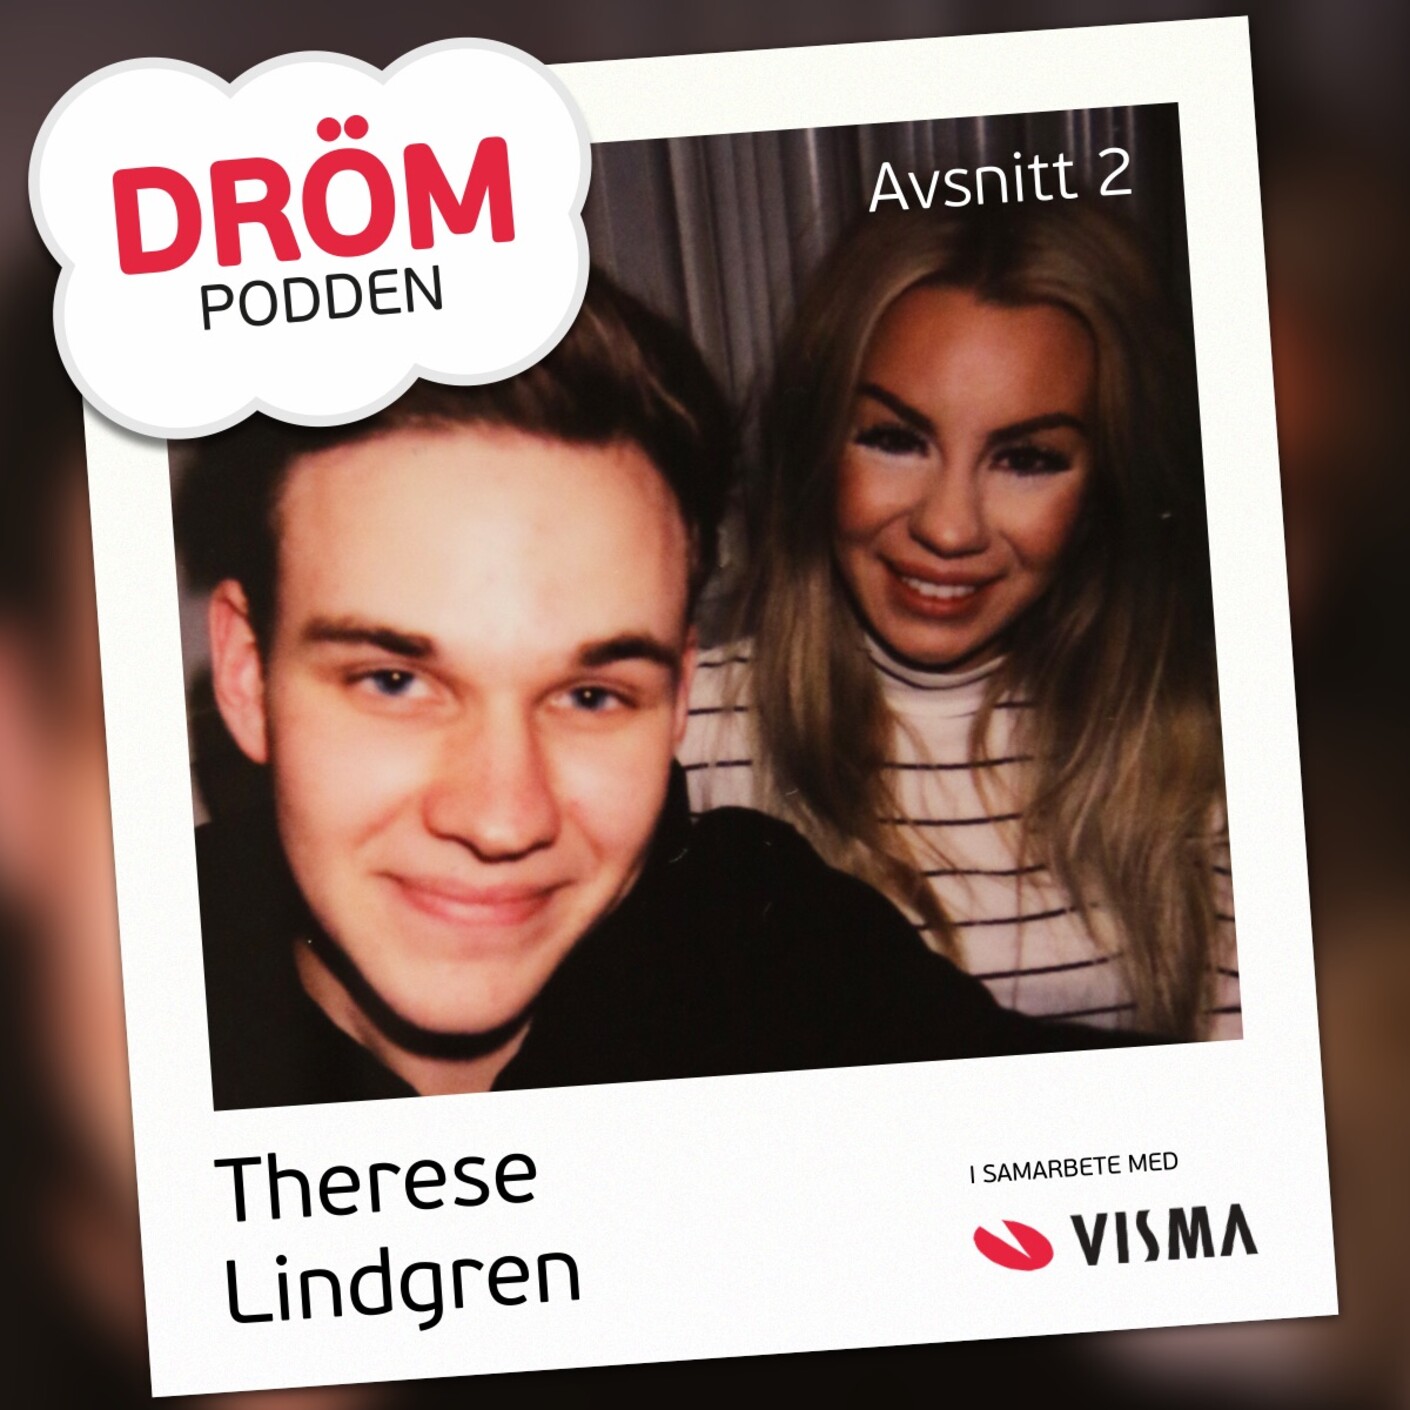 2. Therese Lindgren